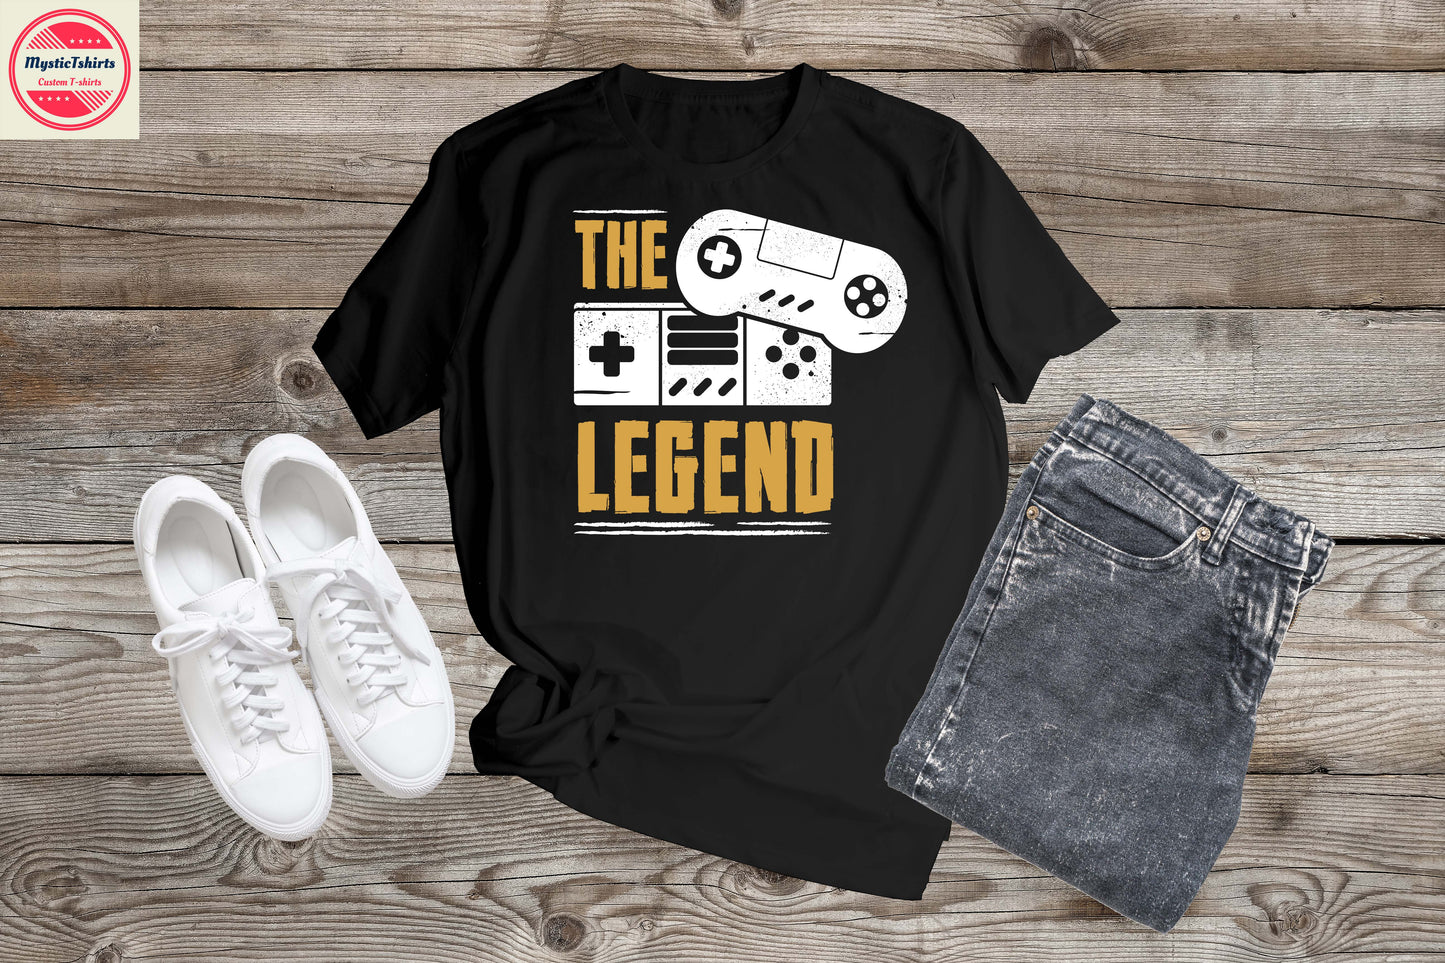 452. THE LEGEND, Custom Made Shirt, Personalized T-Shirt, Custom Text, Make Your Own Shirt, Custom Tee